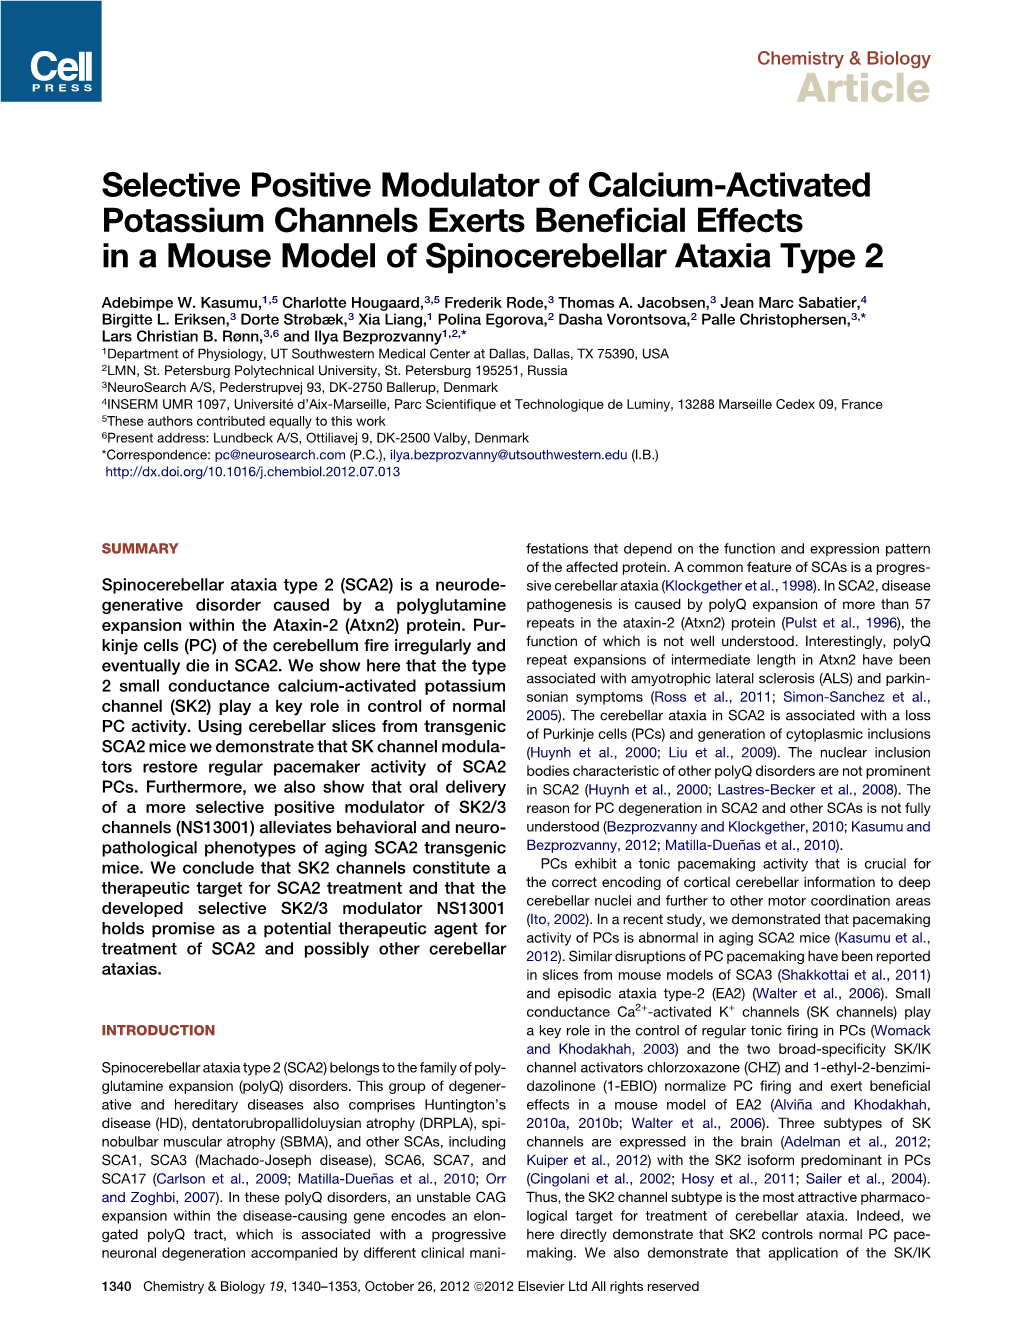 Selective Positive Modulator of Calcium-Activated Potassium Channels Exerts Beneﬁcial Effects in a Mouse Model of Spinocerebellar Ataxia Type 2